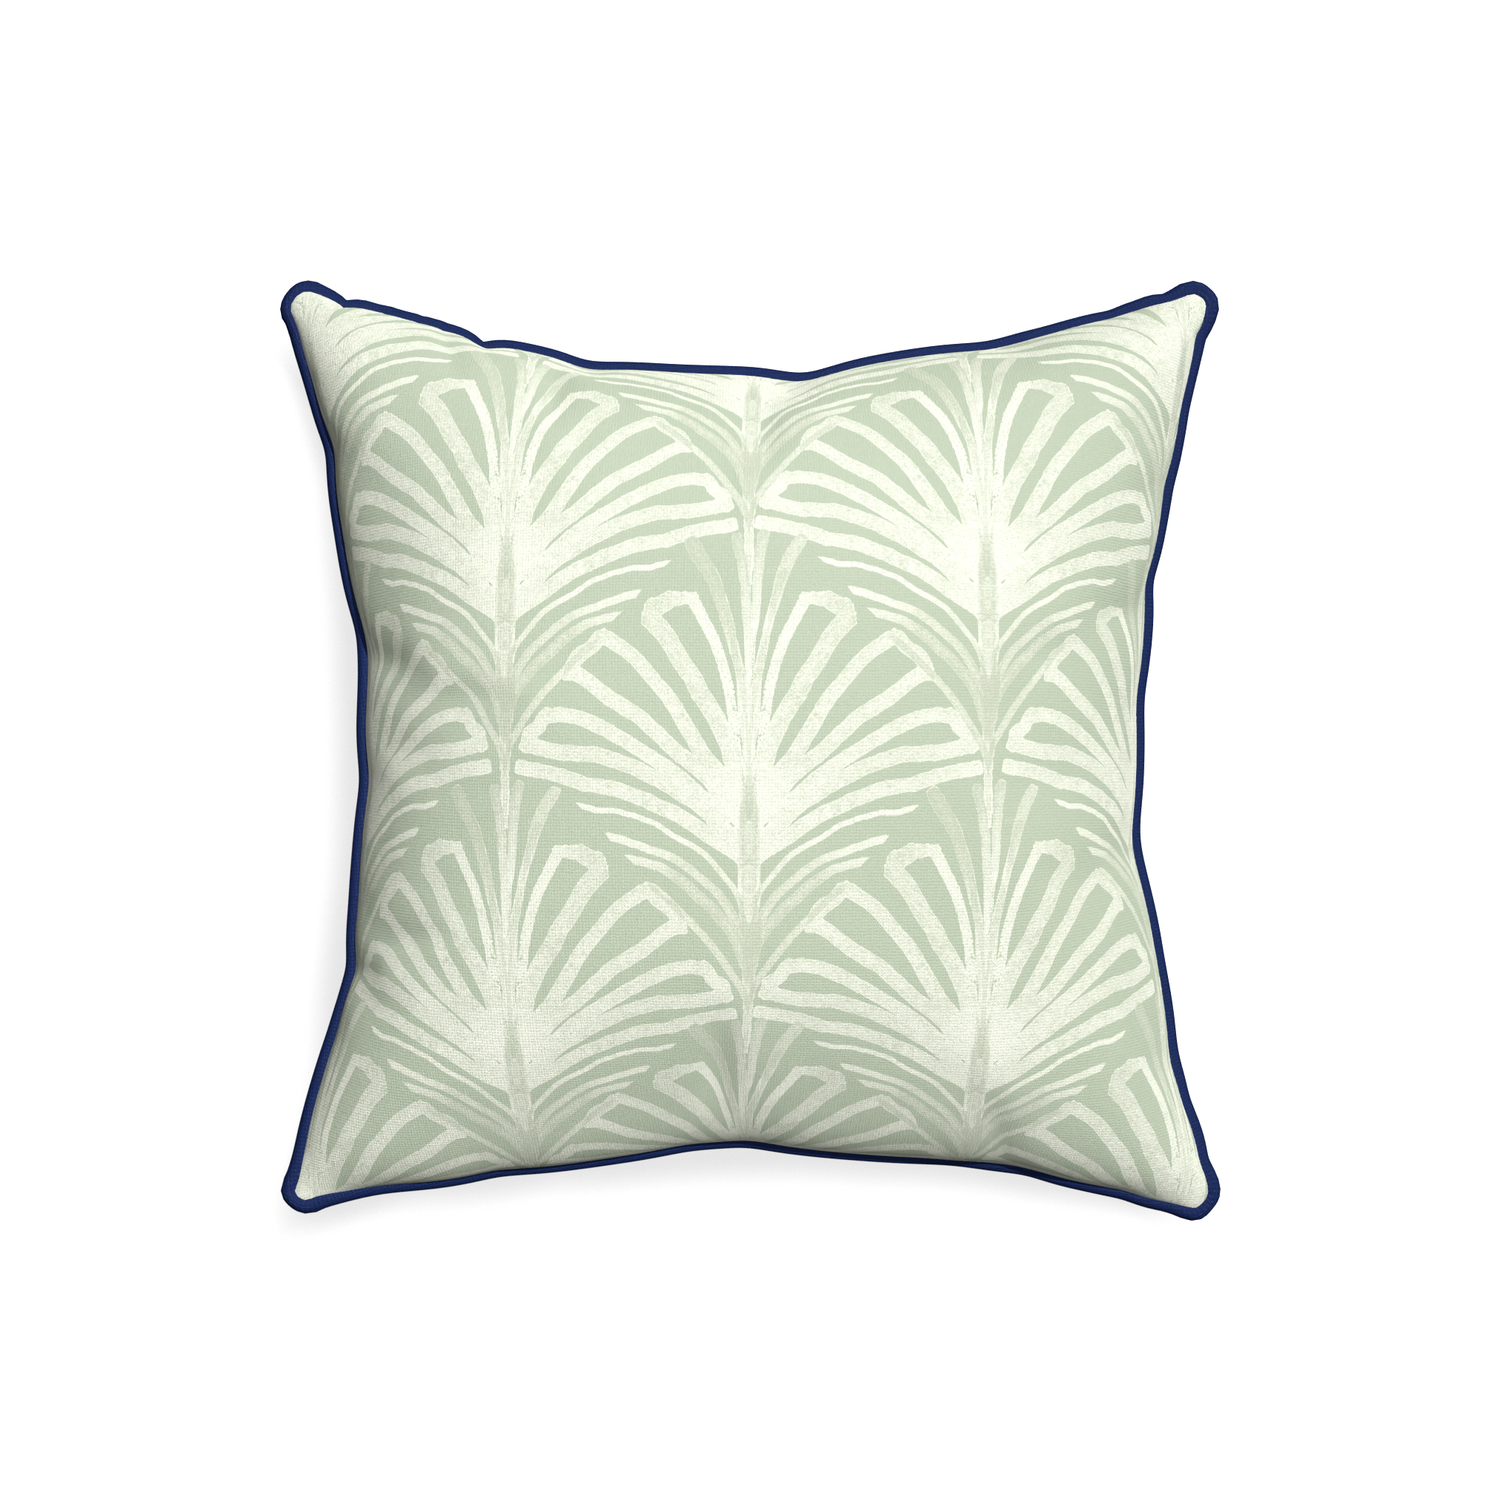 20-square suzy sage custom pillow with midnight piping on white background